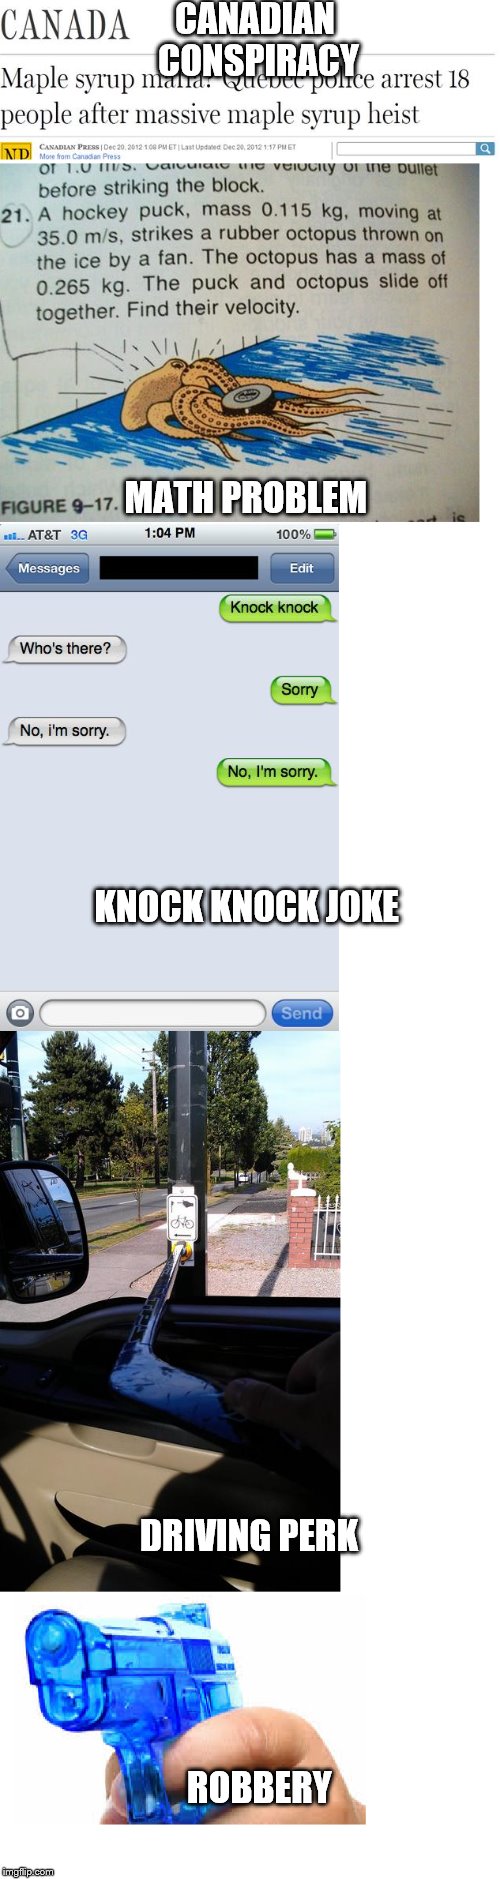  CANADIAN CONSPIRACY; MATH PROBLEM; KNOCK KNOCK JOKE; DRIVING PERK; ROBBERY | image tagged in memes,canadian,funny | made w/ Imgflip meme maker